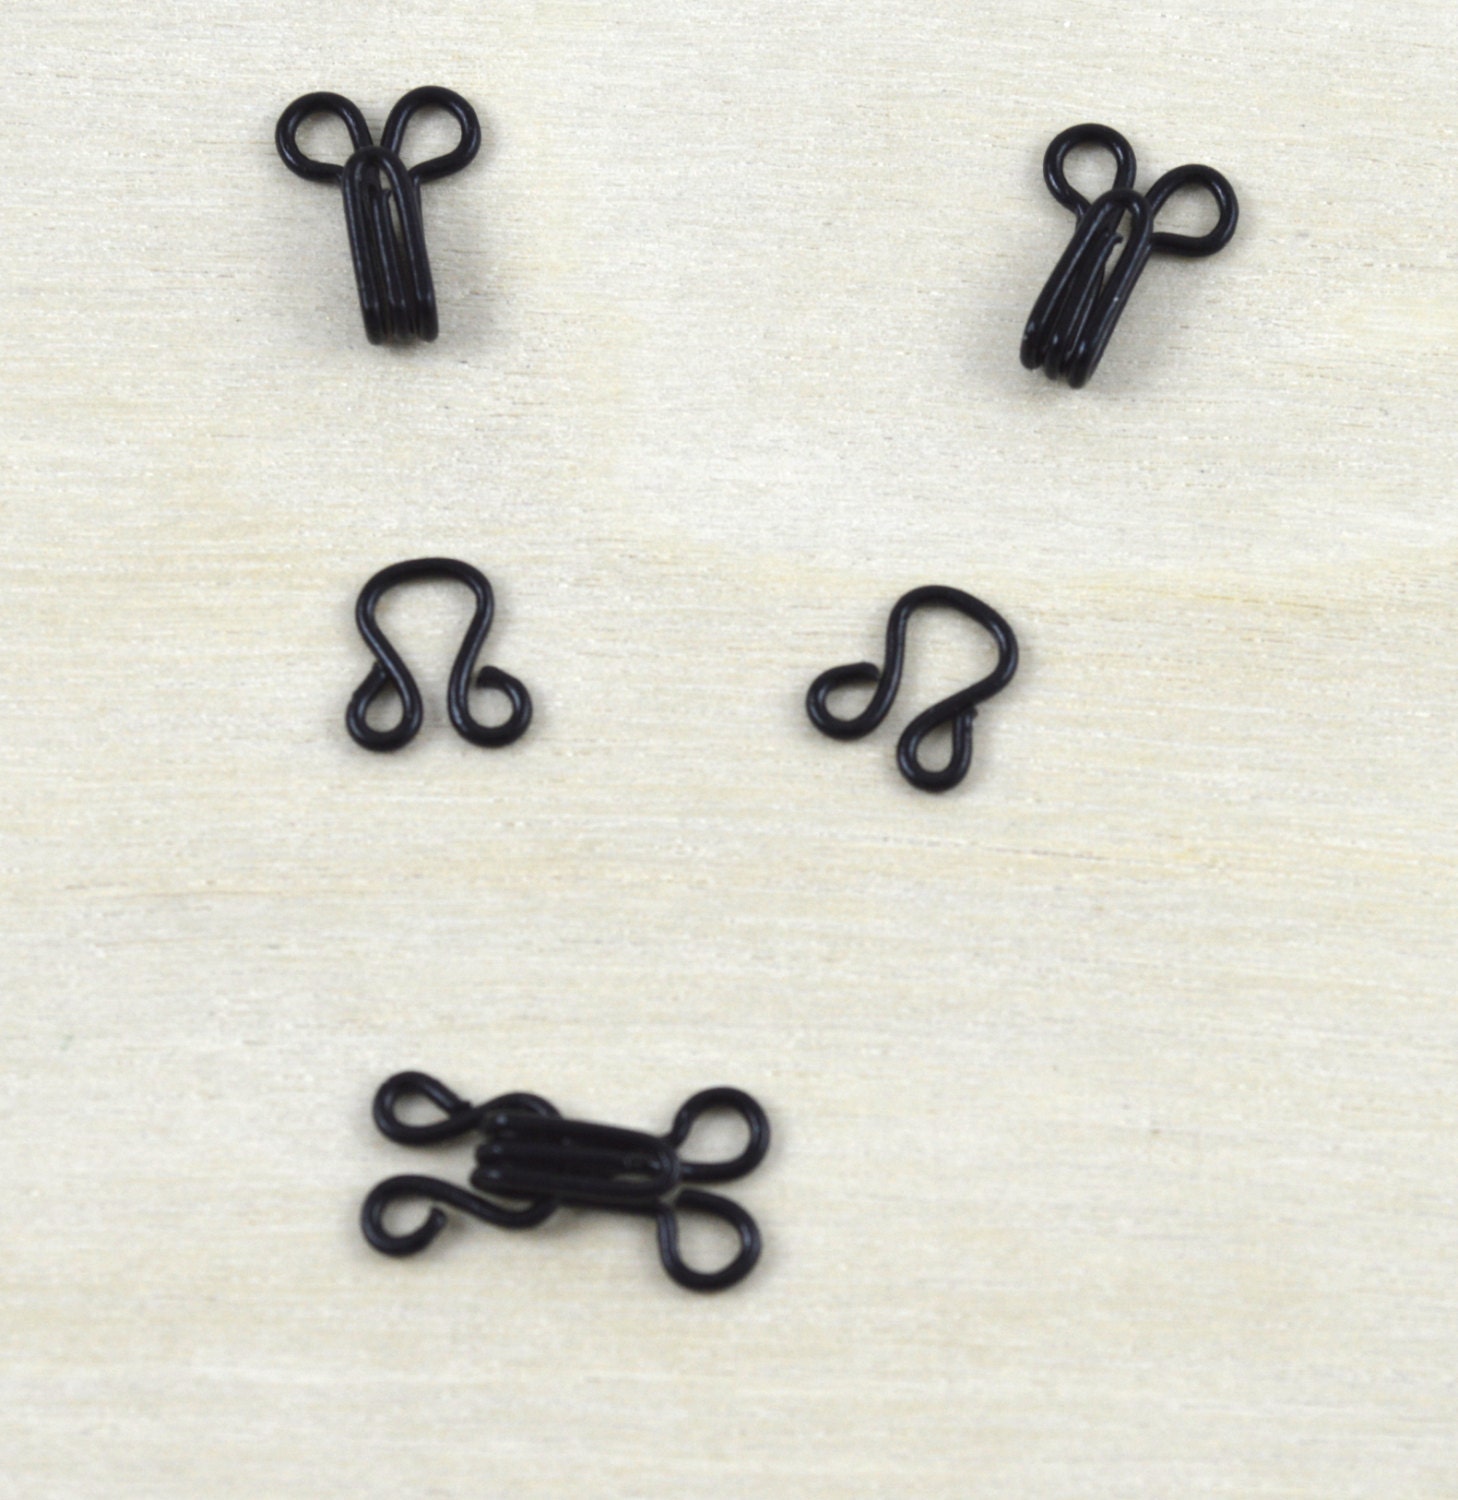  EXCEART 40 Sets Hook and Eye Button Shawl Collar Clasp Hook and  Eye Clasp Bra Sewing Eye Closure Swimwear Eye Fastener Hook and Bar Closure  Clasps for Clothing Buckle Wrought Iron